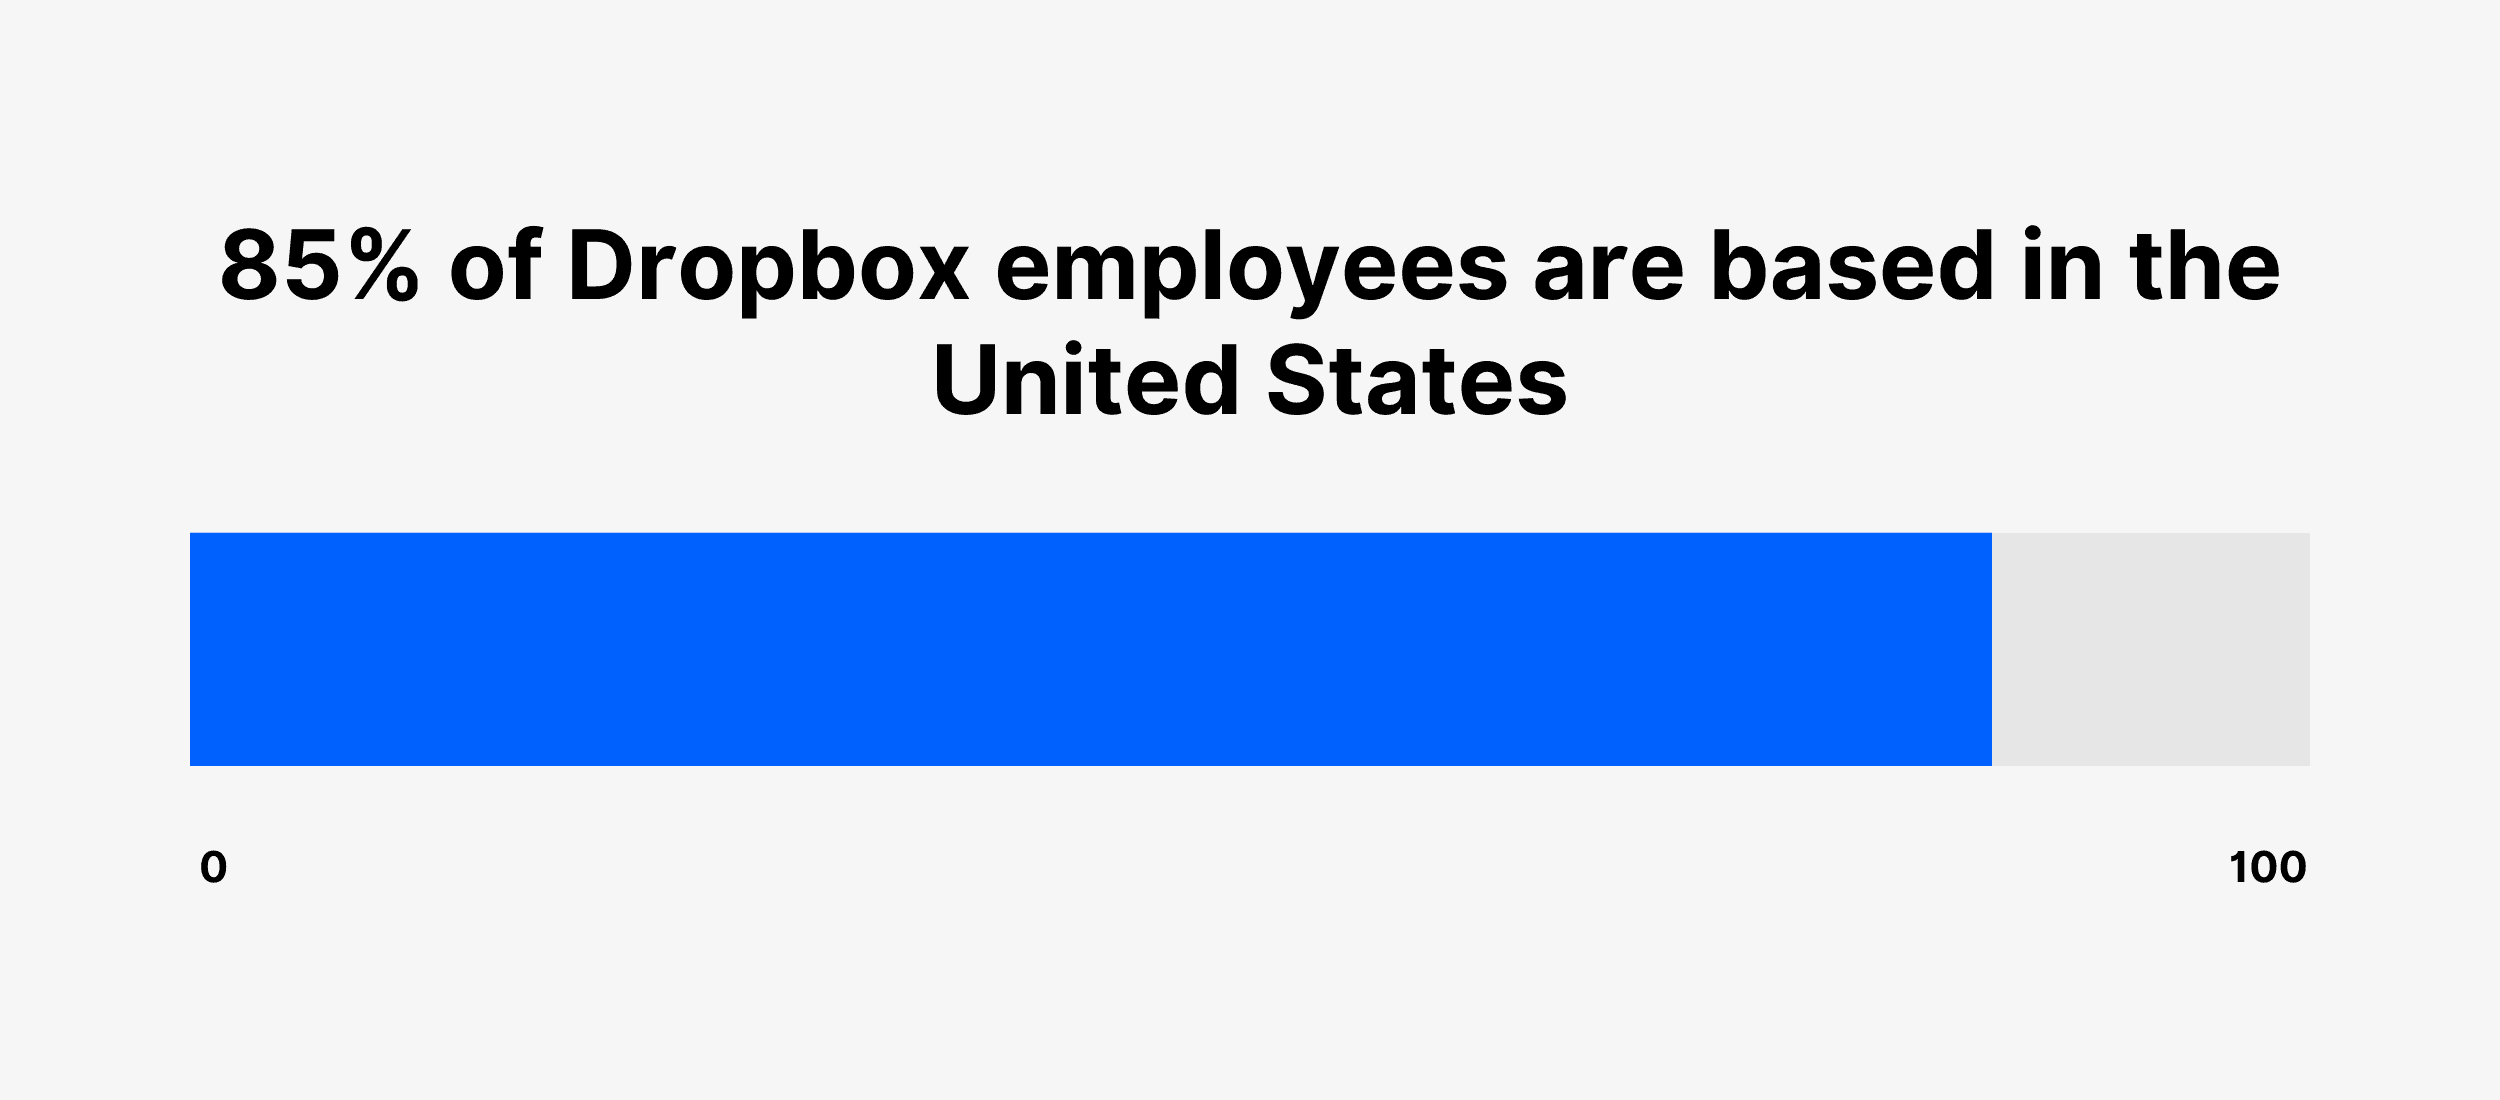 85% of Dropbox employees are based in the United States